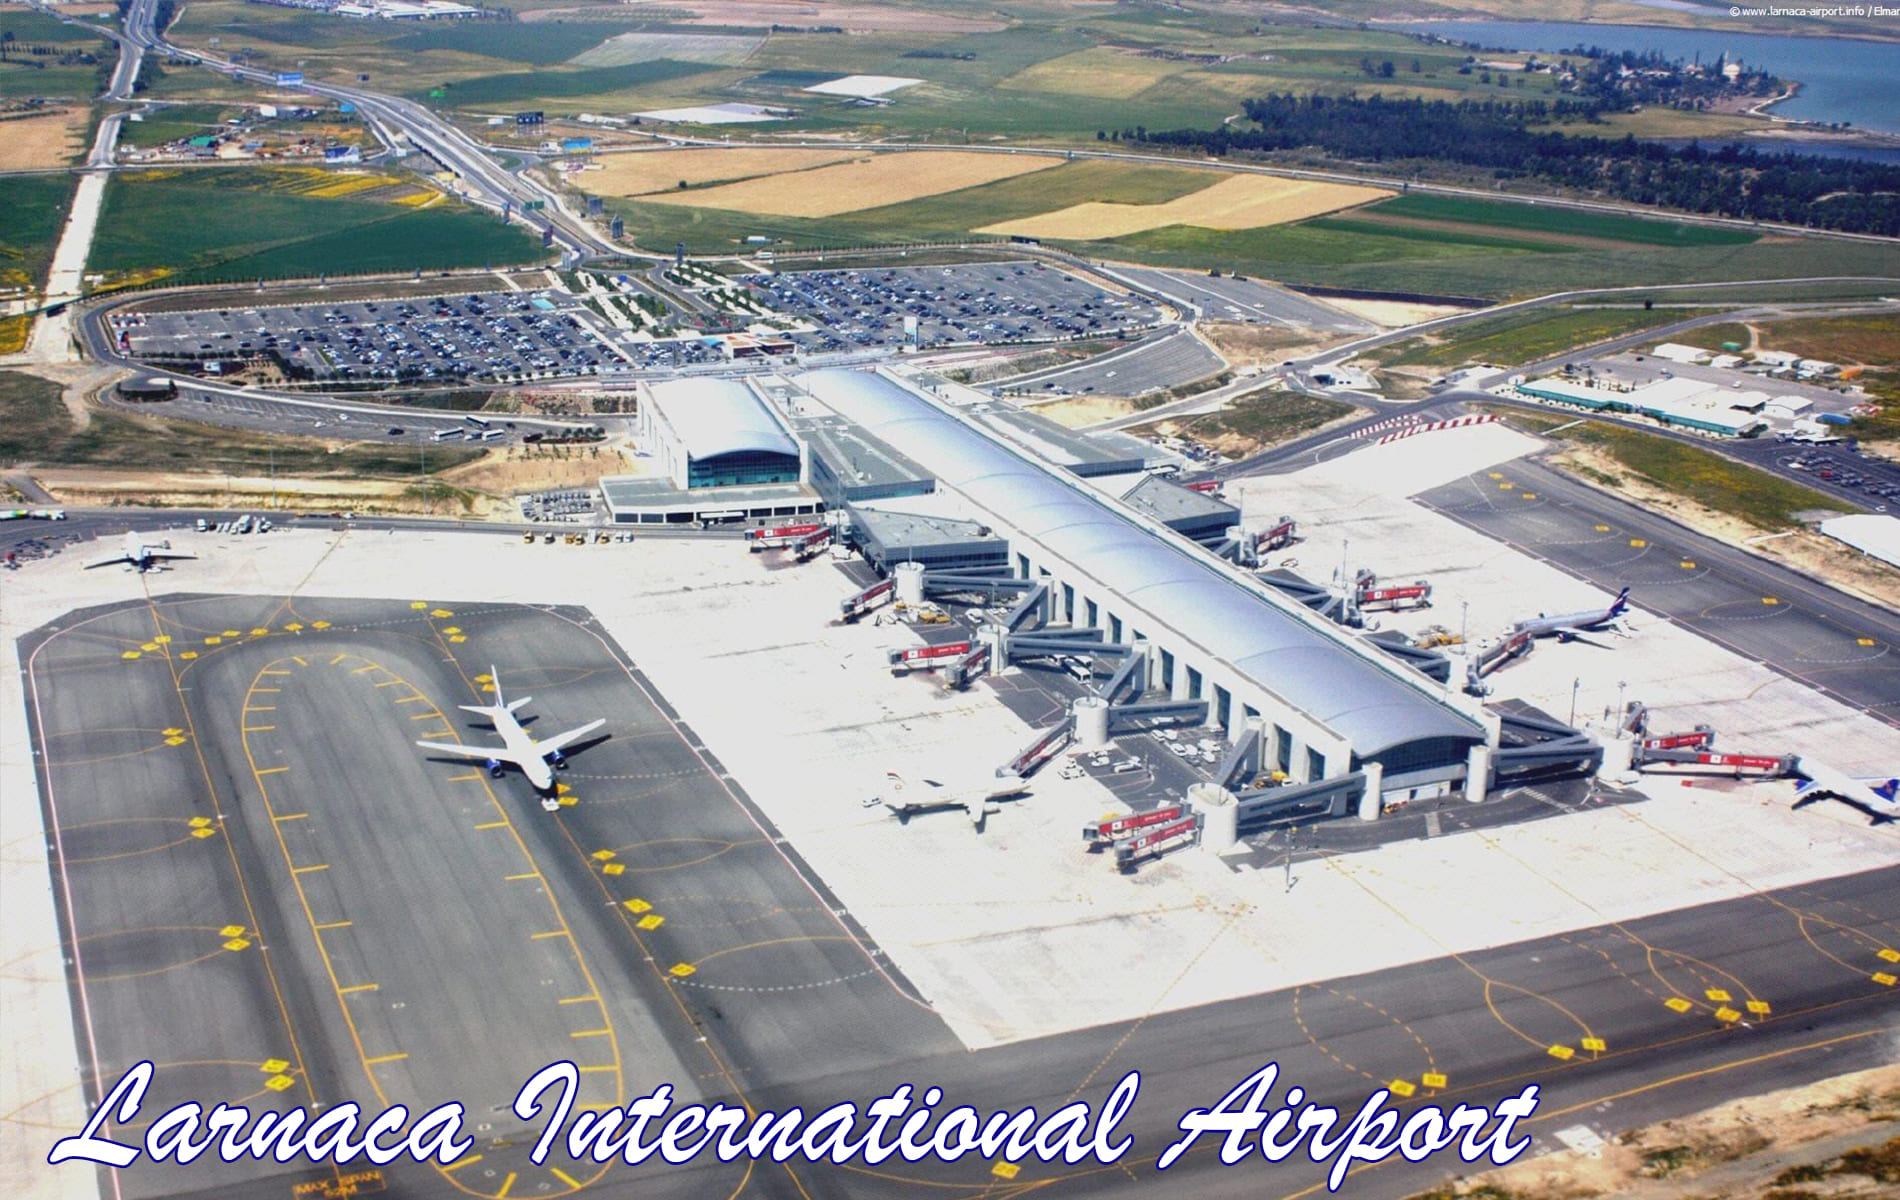 Order a taxi Larnaca transfer from airport